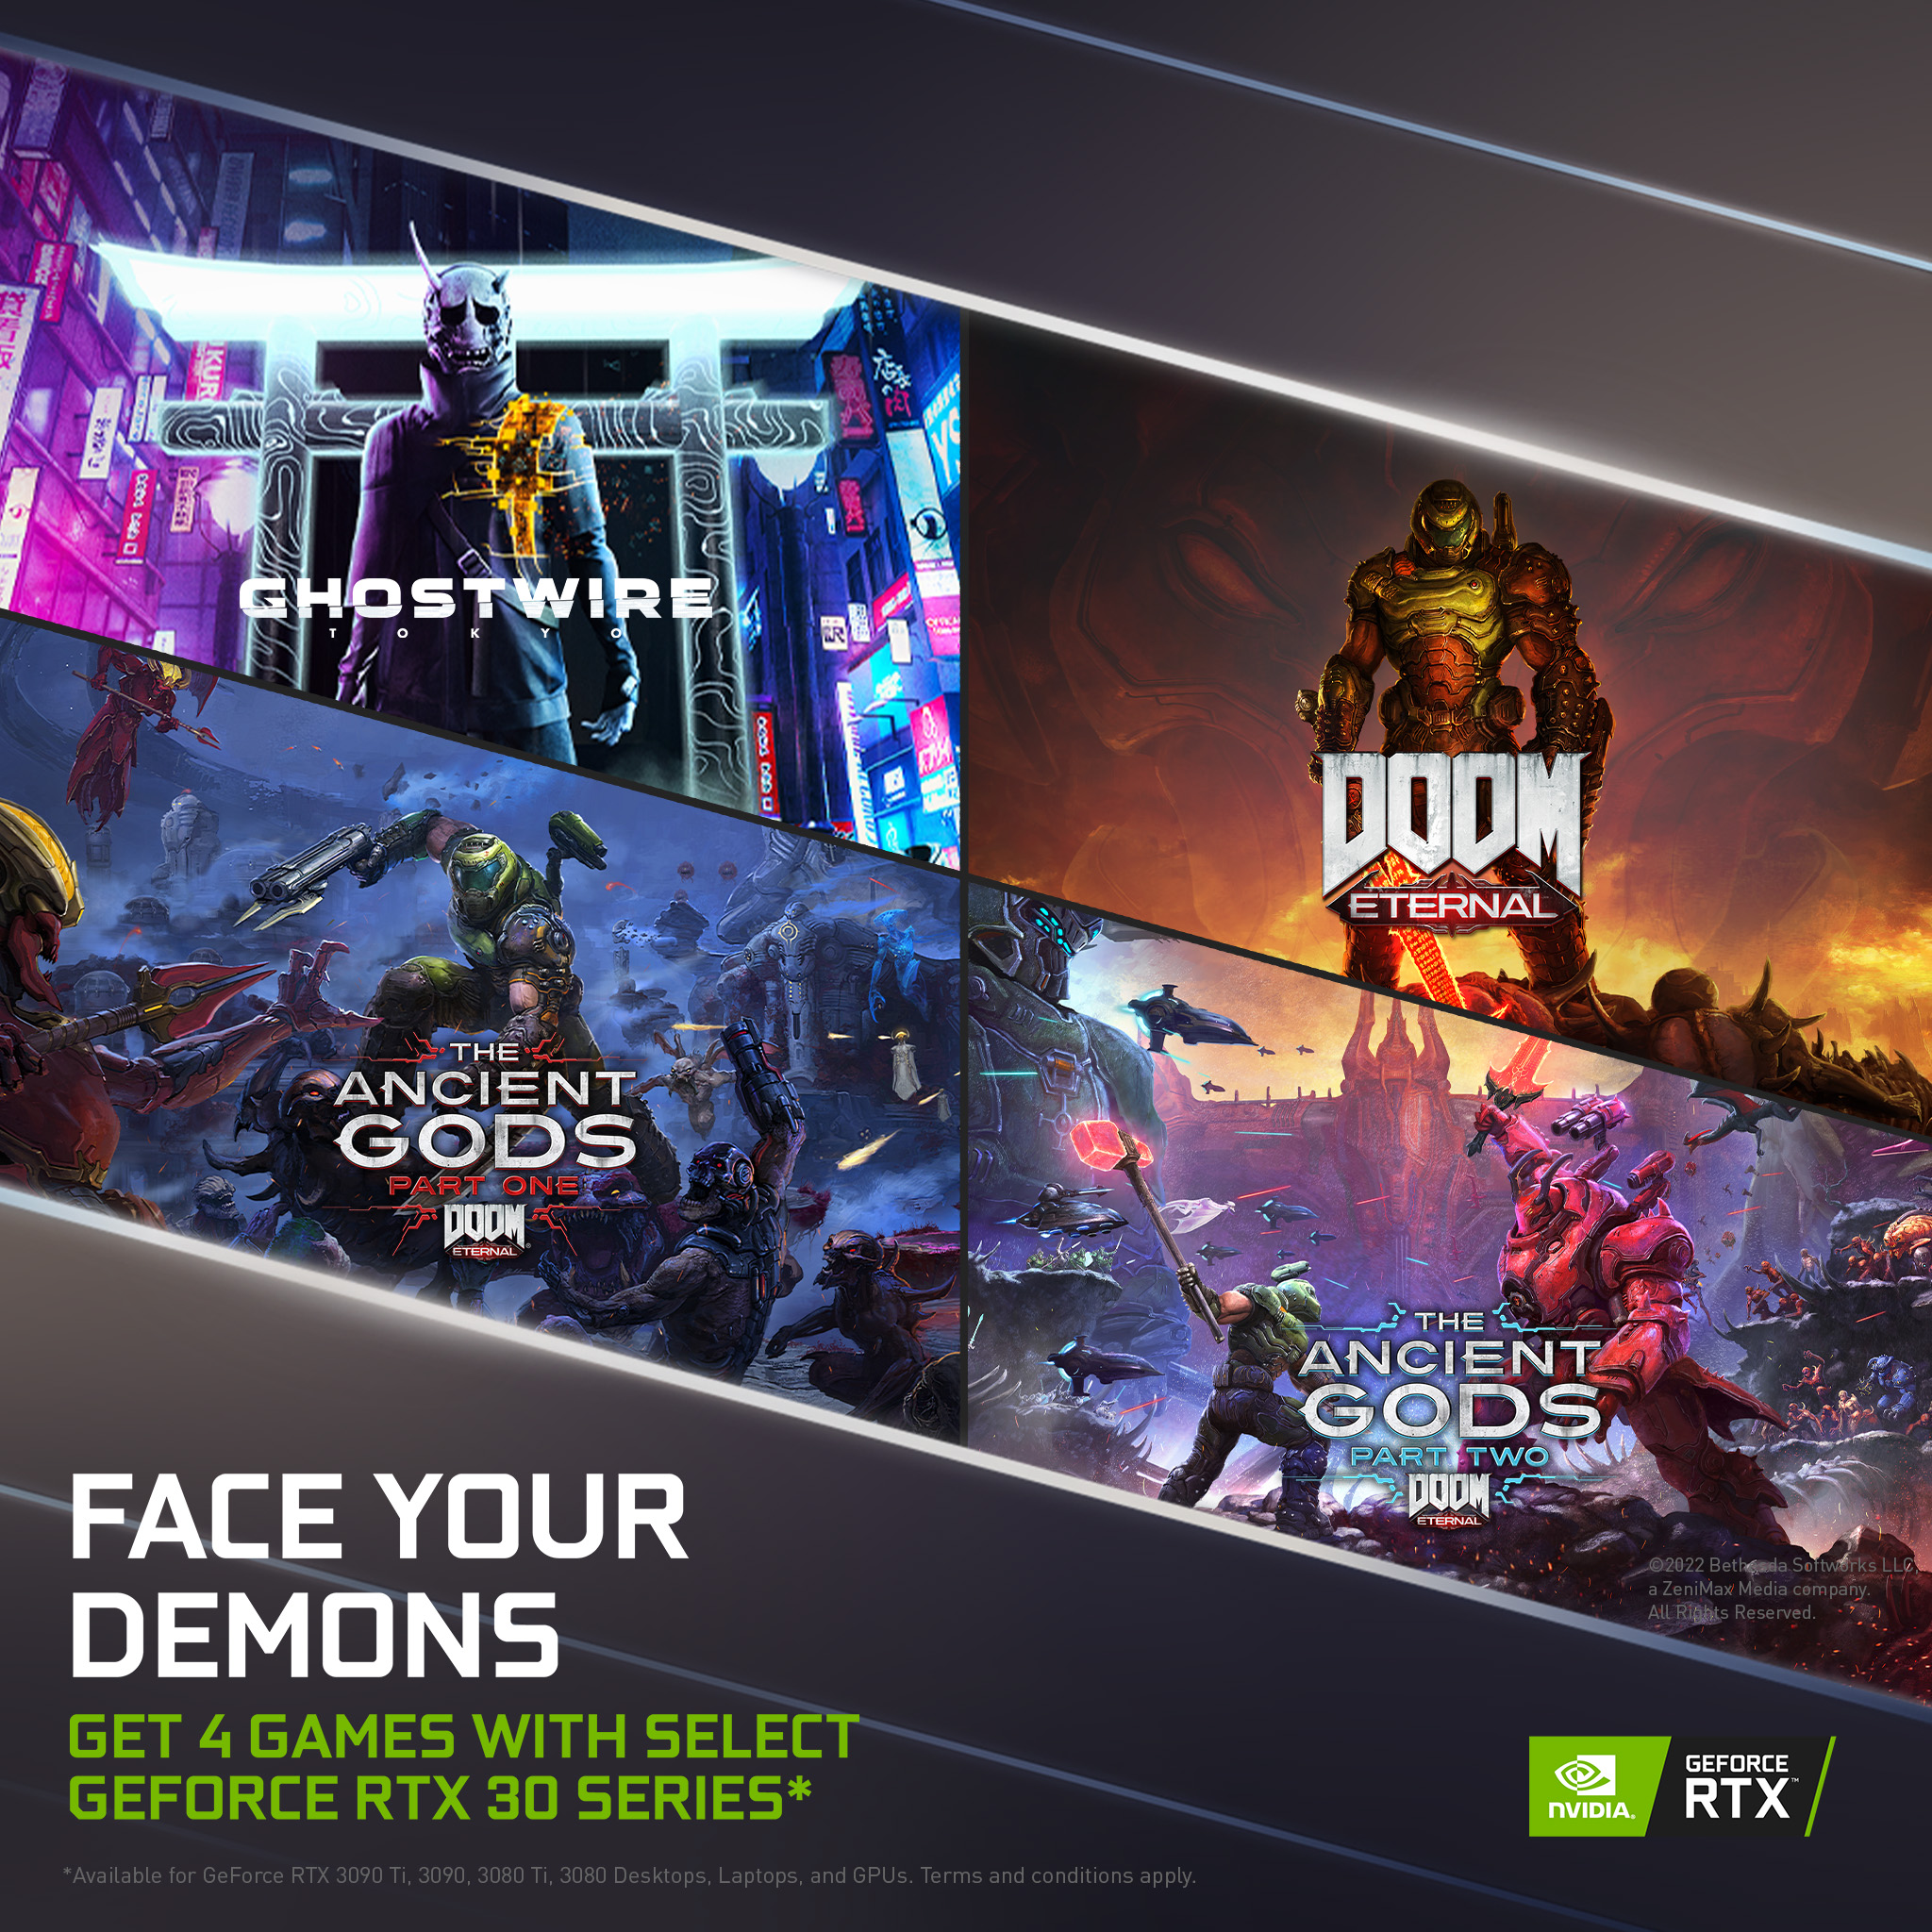 GeForce RTX Face Your Demons - Get 4 Games with Select GeForce RTX 30 Series